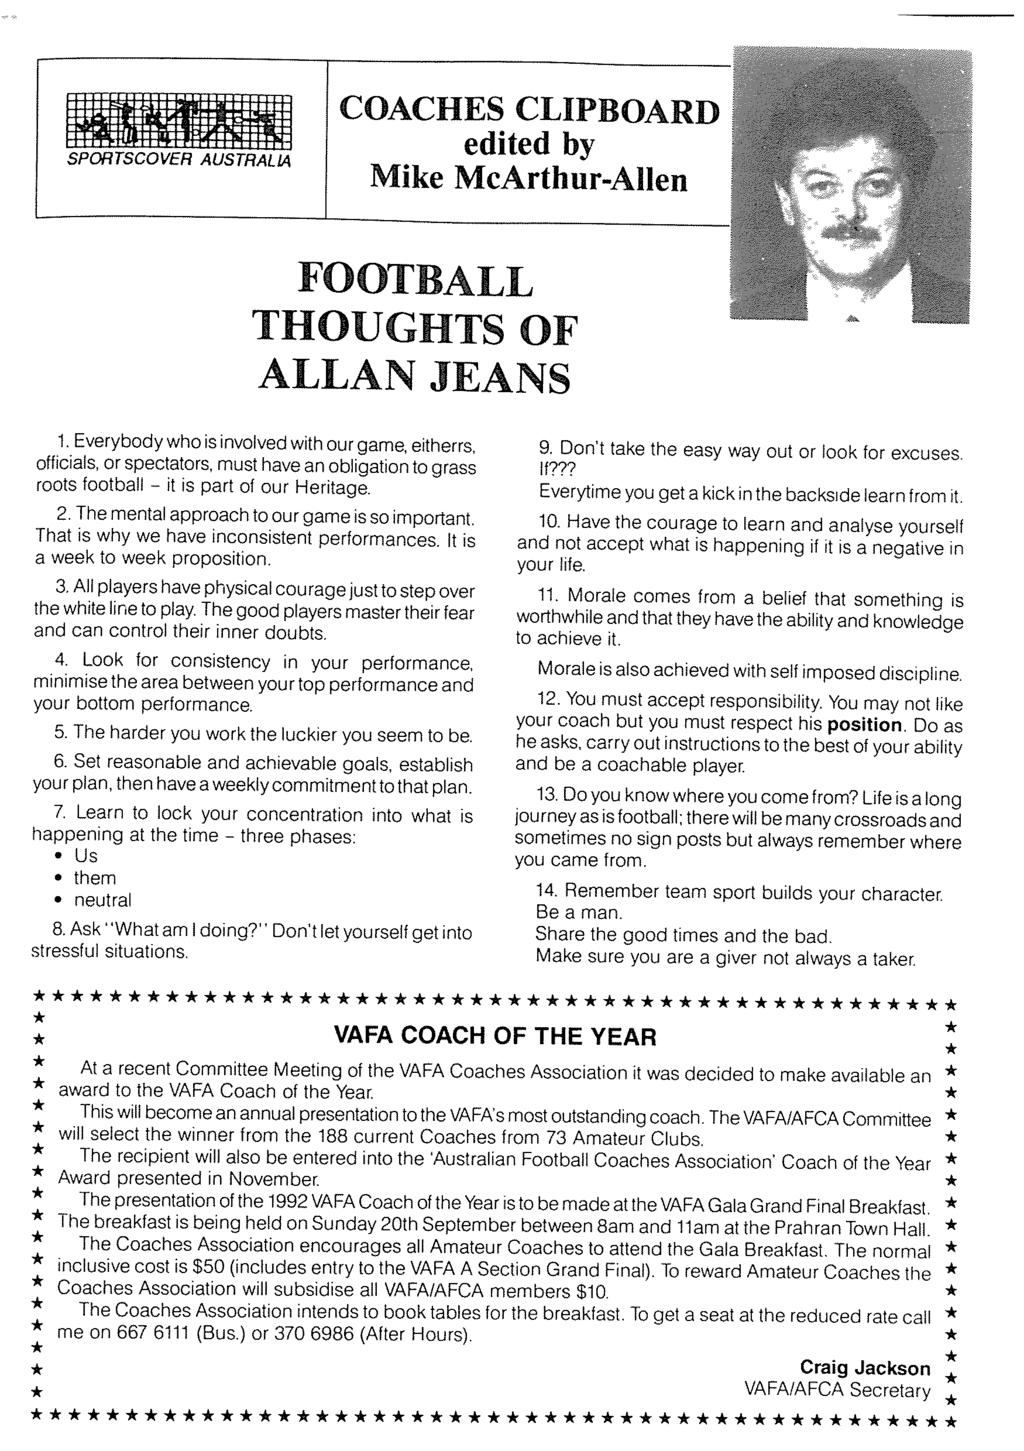 SPORTSCOVER AUSTRALIA COACHES CLIPBOAR D edited by Mike McArthur-Allen FOOTBALL THOUGHTS F ALLAN JEANS 1.